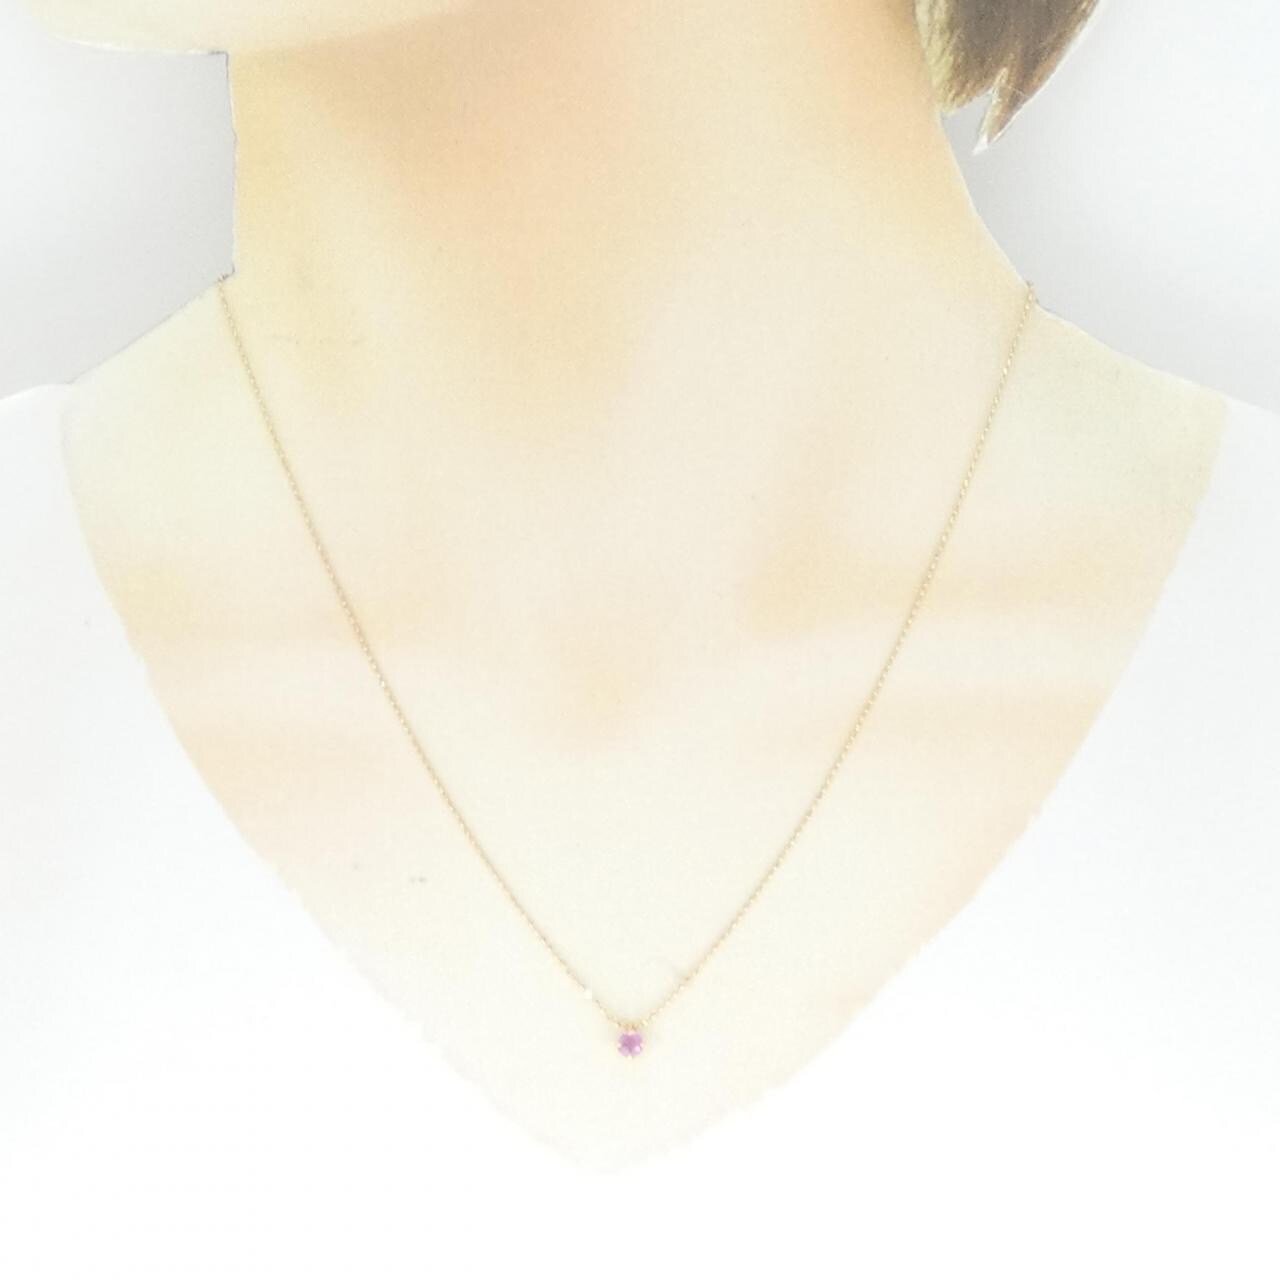 K18YG sapphire necklace diffusion treatment not tested